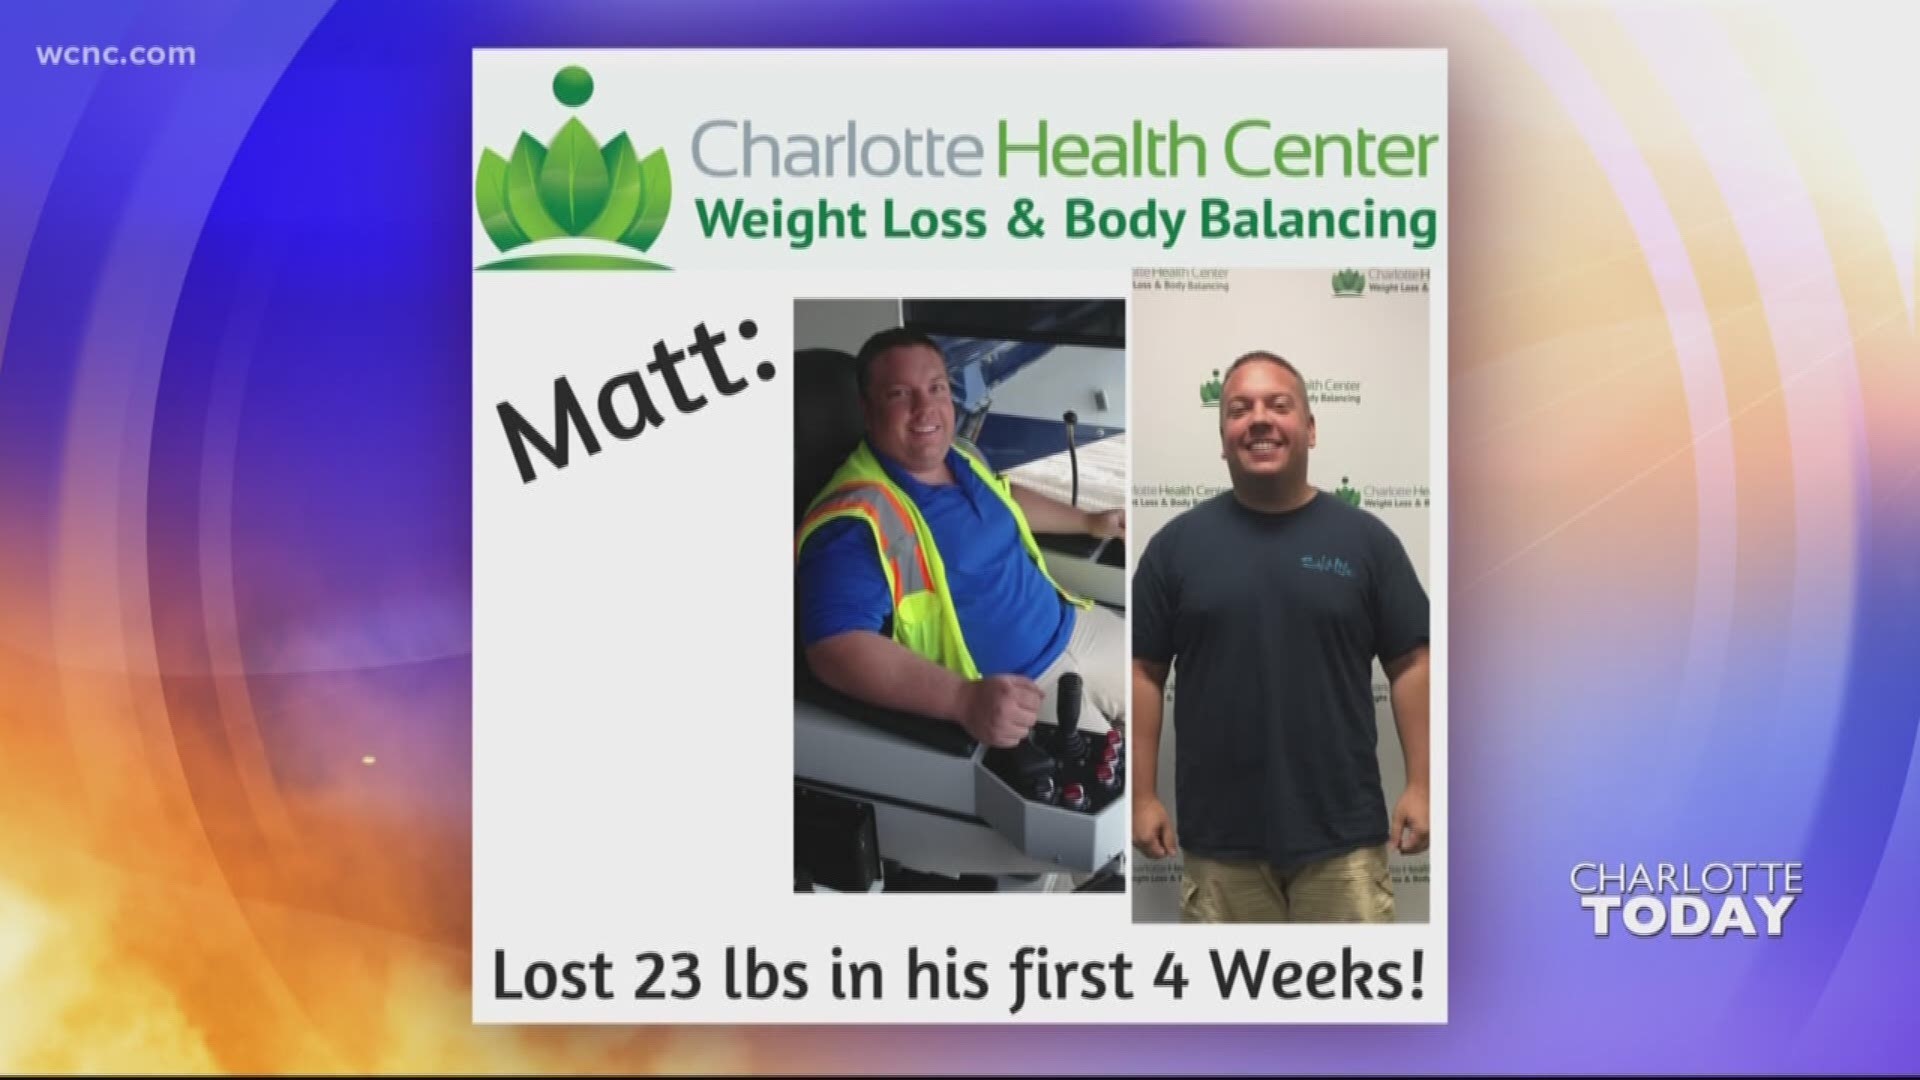 Dr. Matthews McAlees tells us about the weight loss and body balancing program